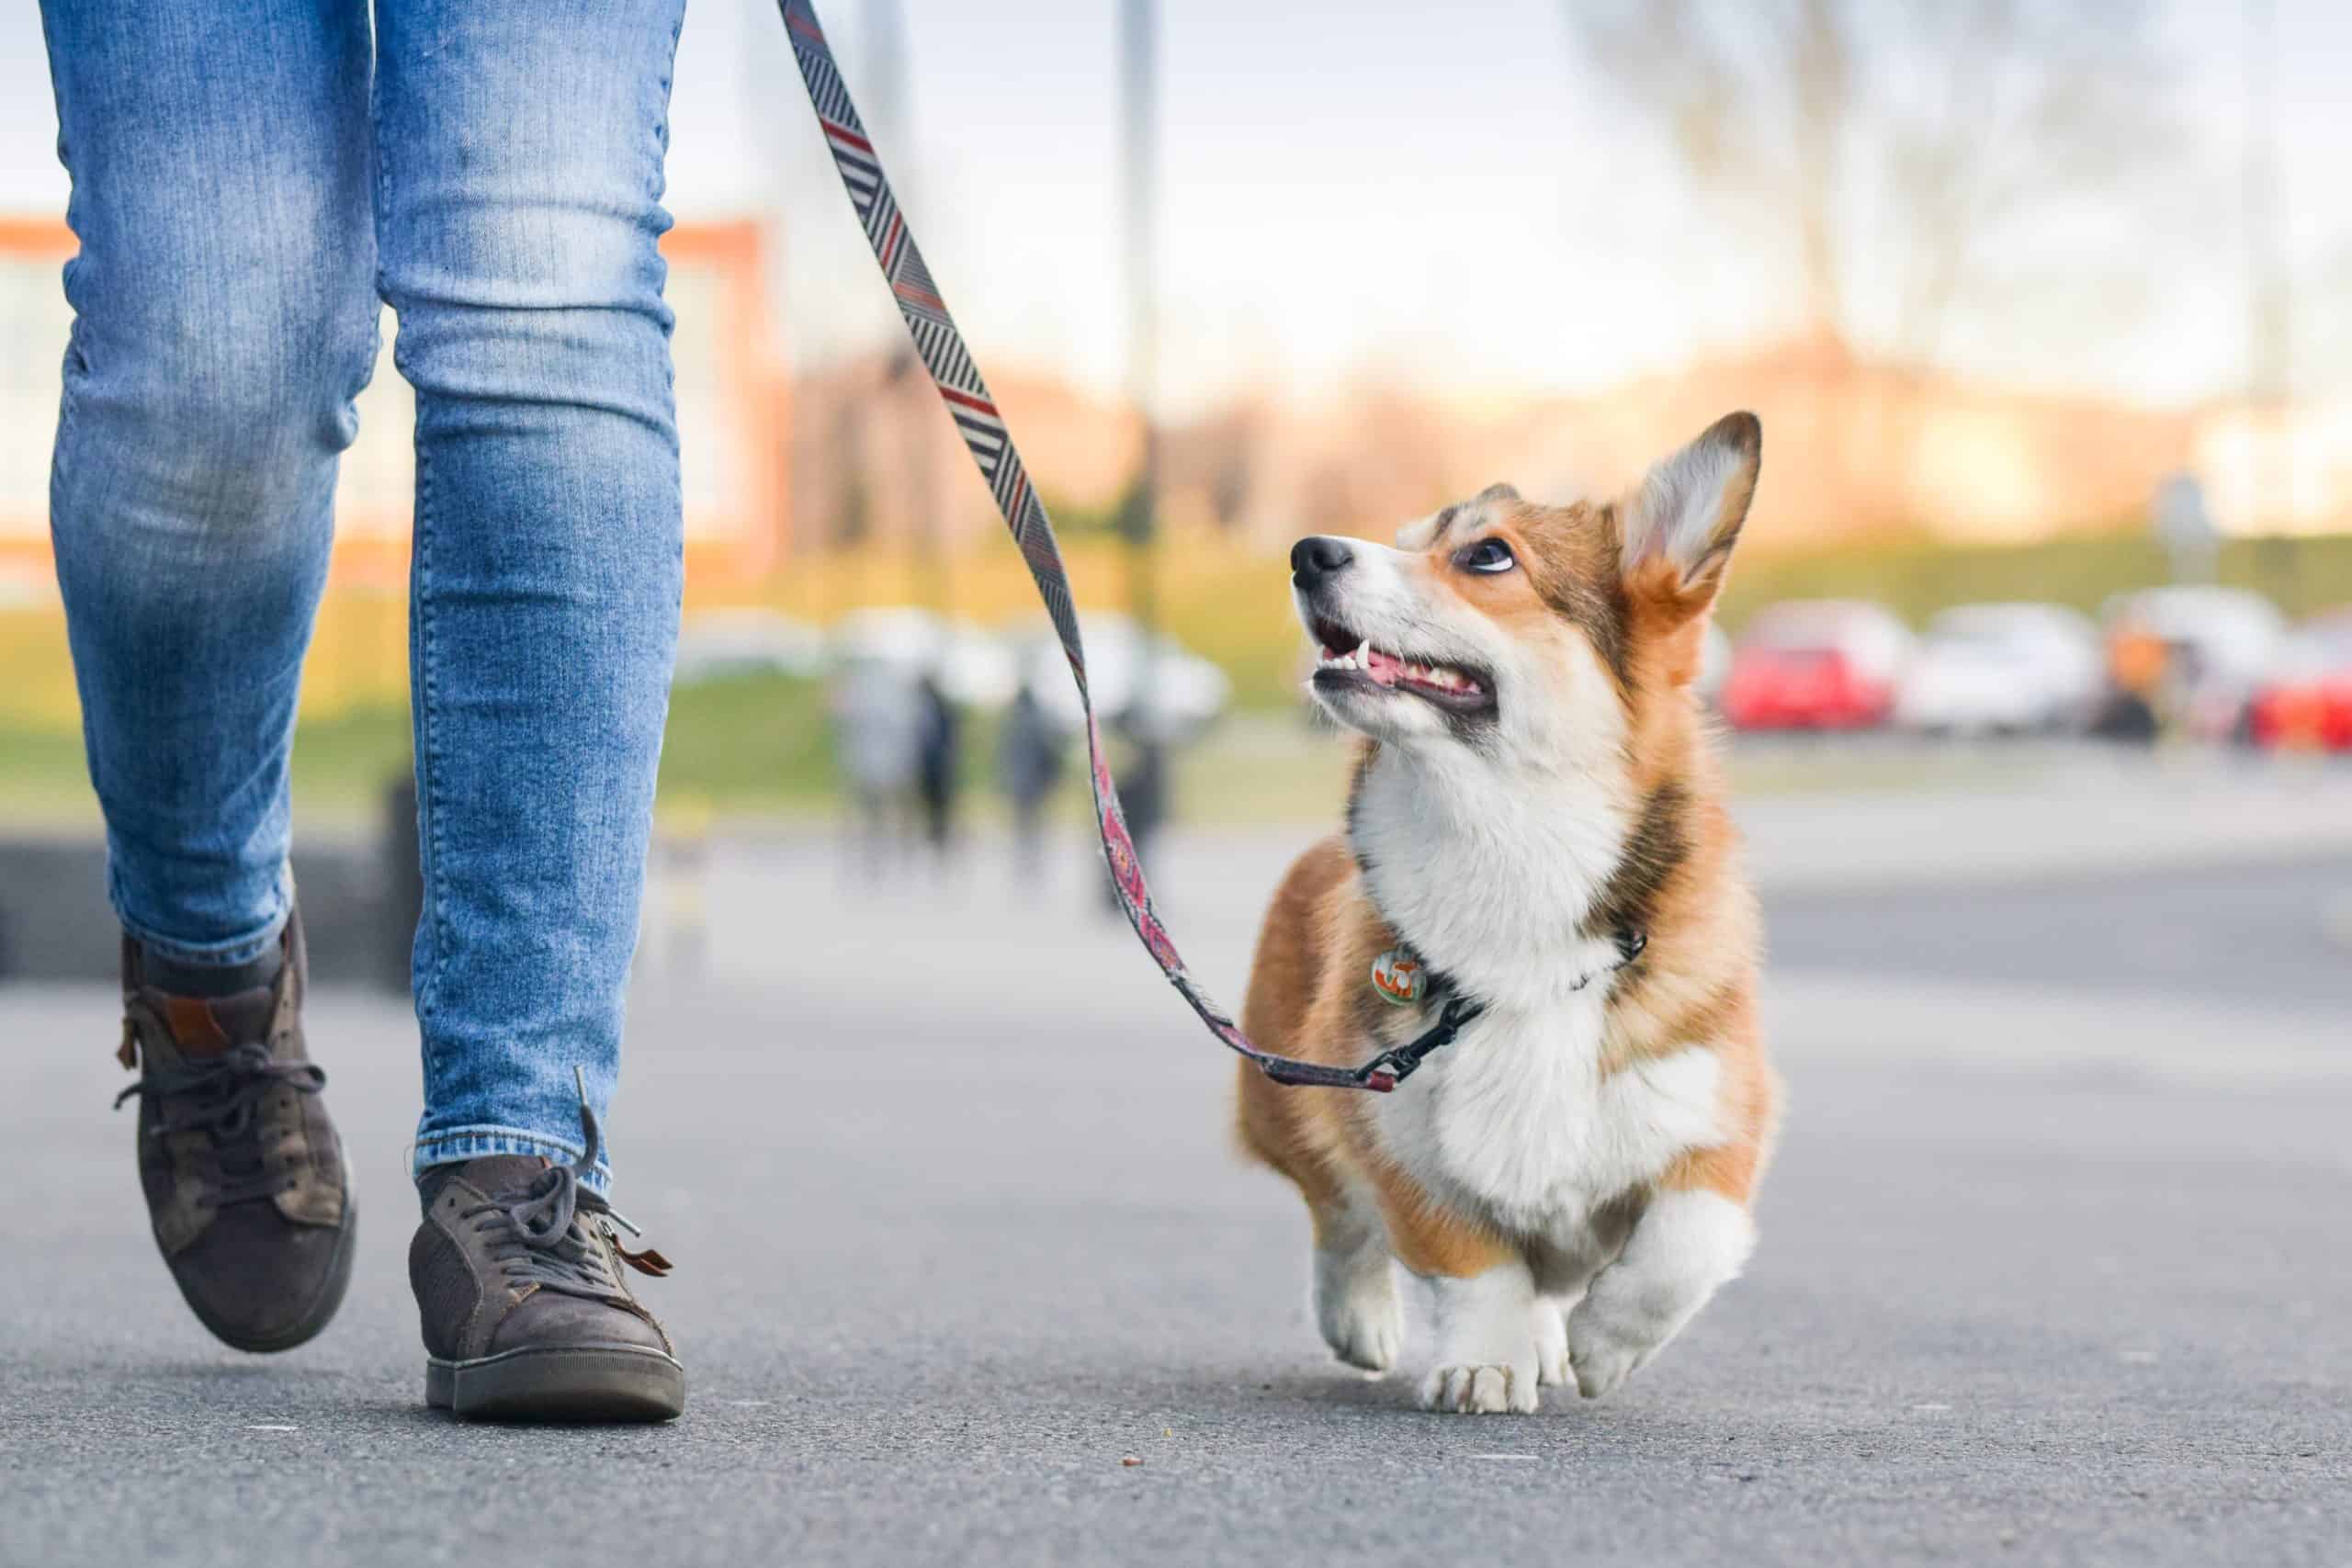 Corgi looks at owner during walk. Dogs need regular exercise like daily walks to stay healthy.